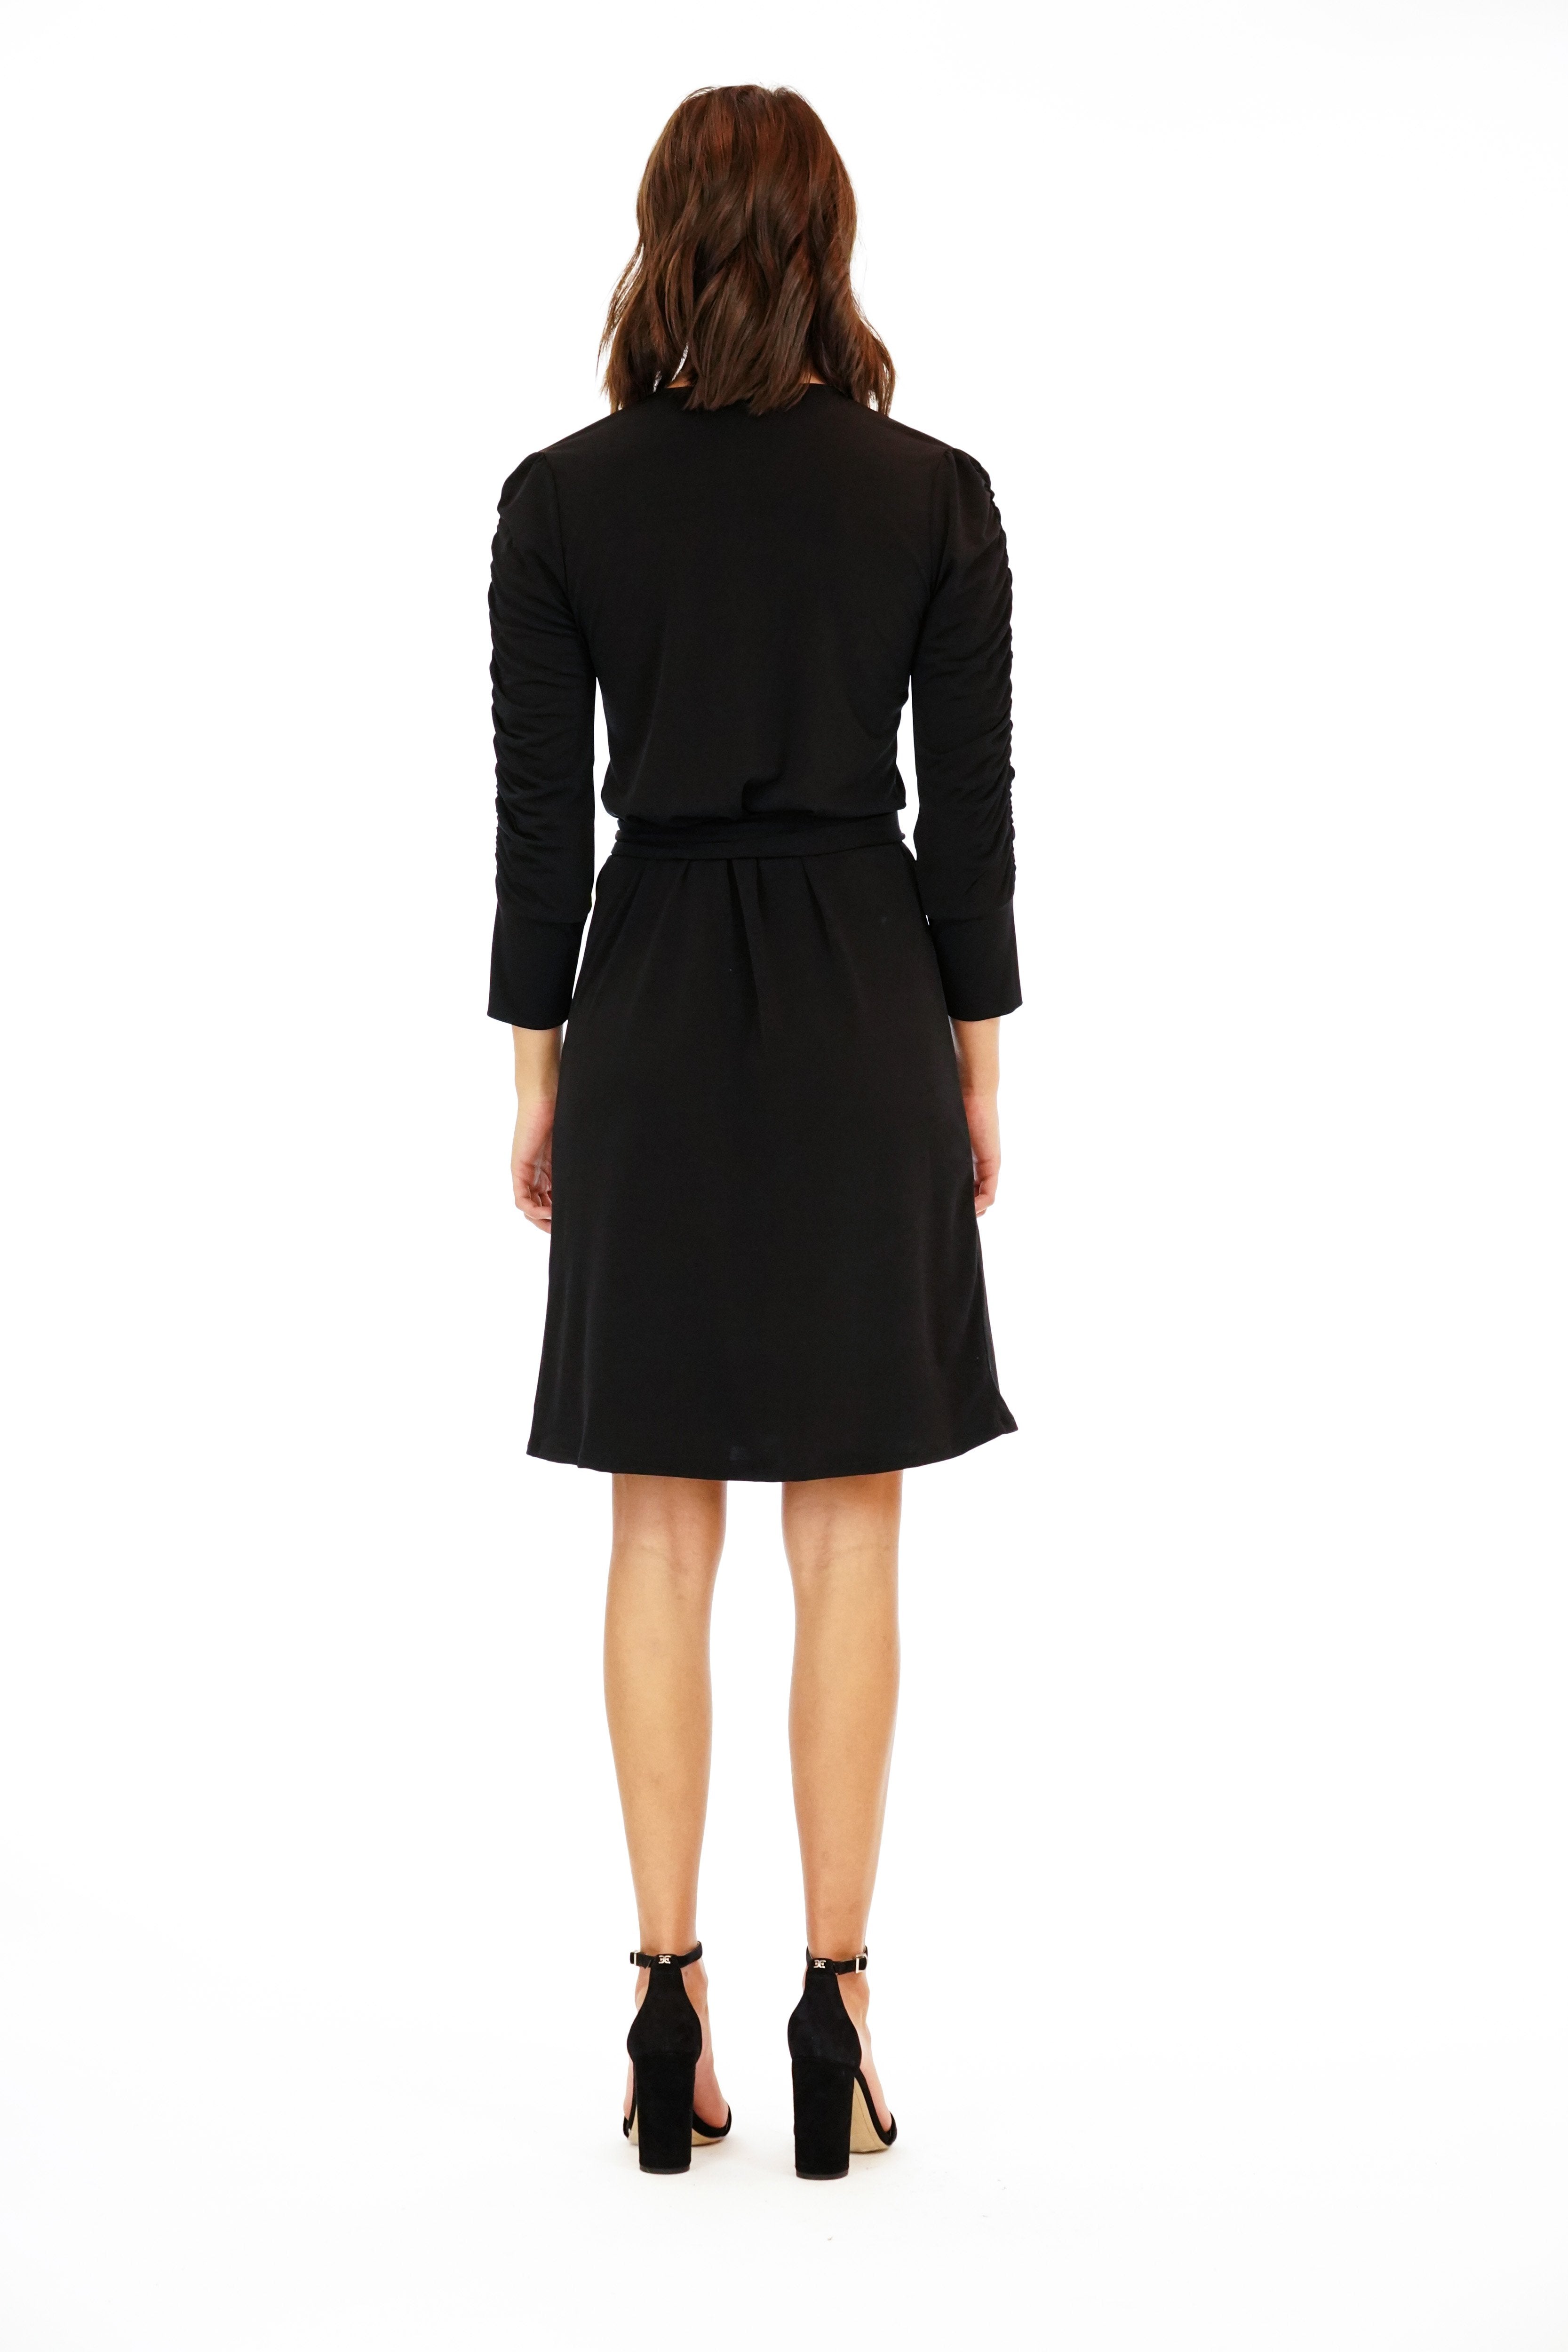 Black Wrap Dress with Ruching